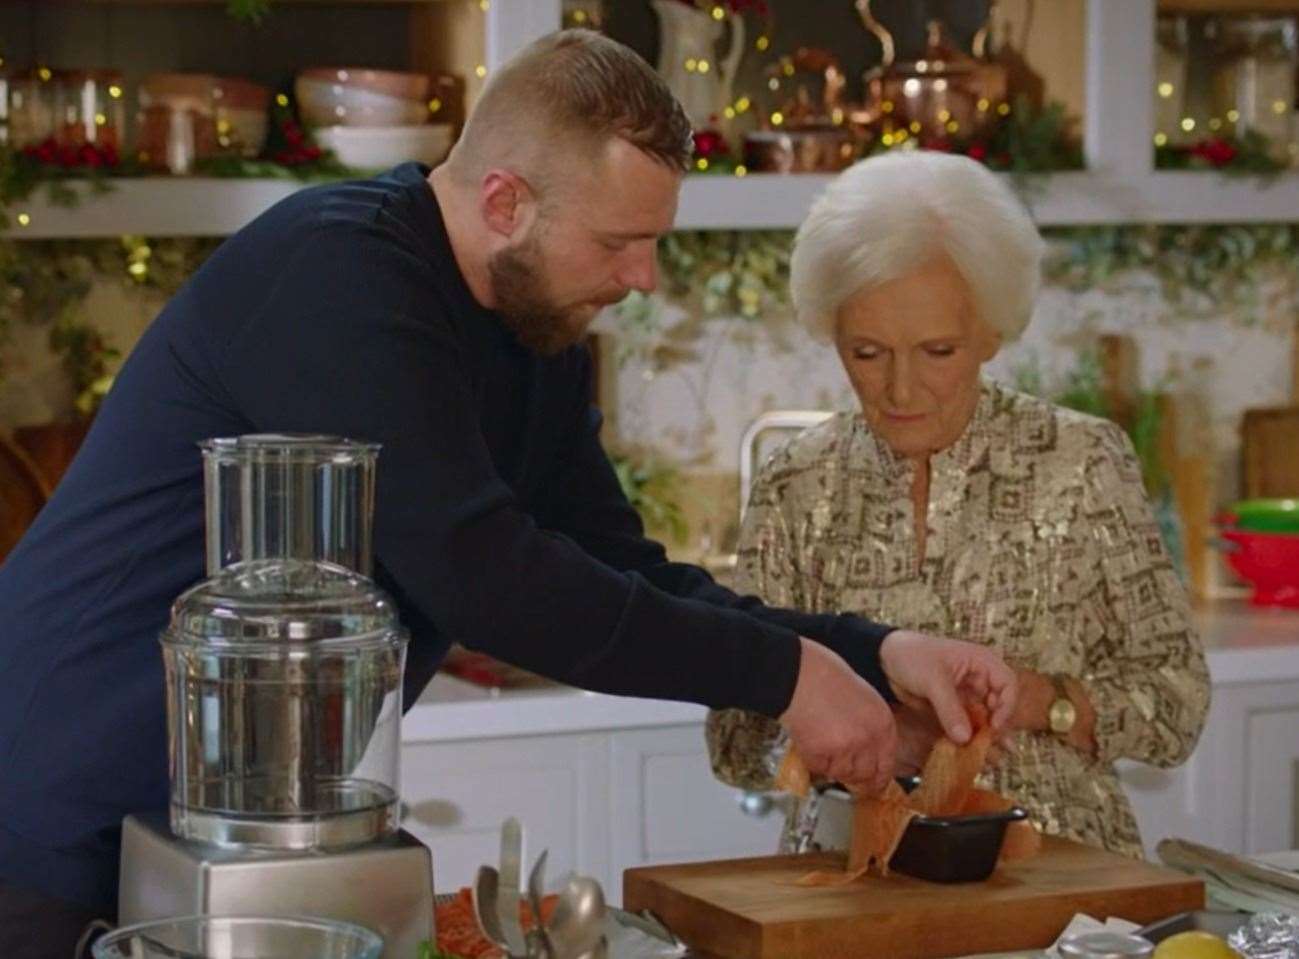 Jack was taught how to make a salmon pate starter. Picture: BBC/Mary Berry's Festive Feasts